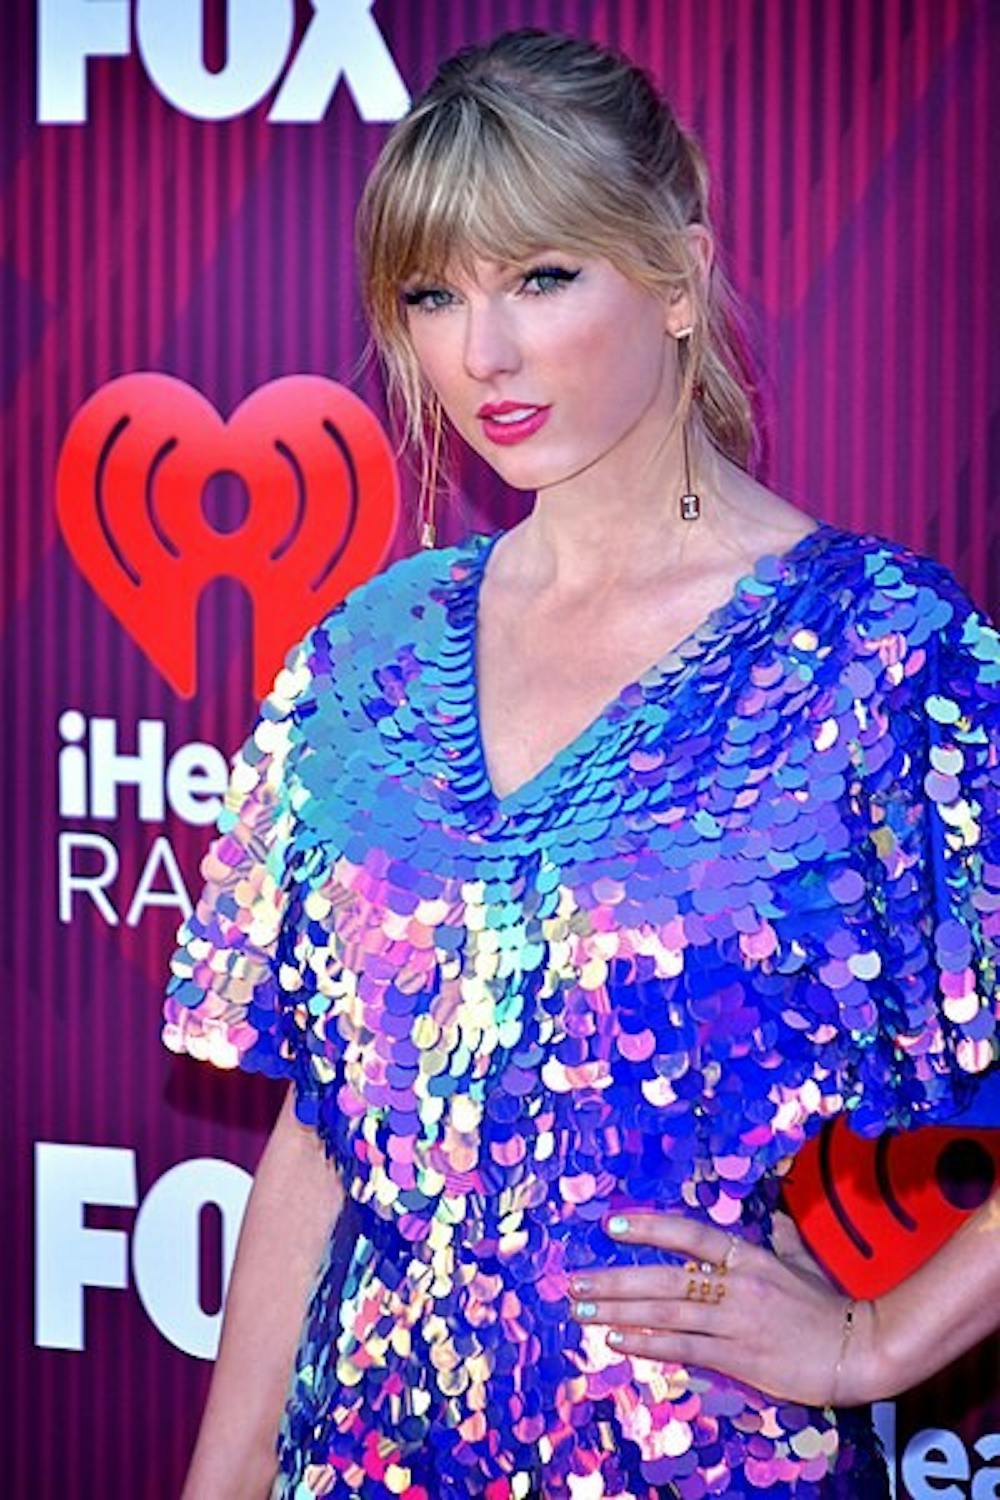 Taylor Swift, pictured here earlier in 2019, was named the Artist of the Decade at this year's American Music Awards.